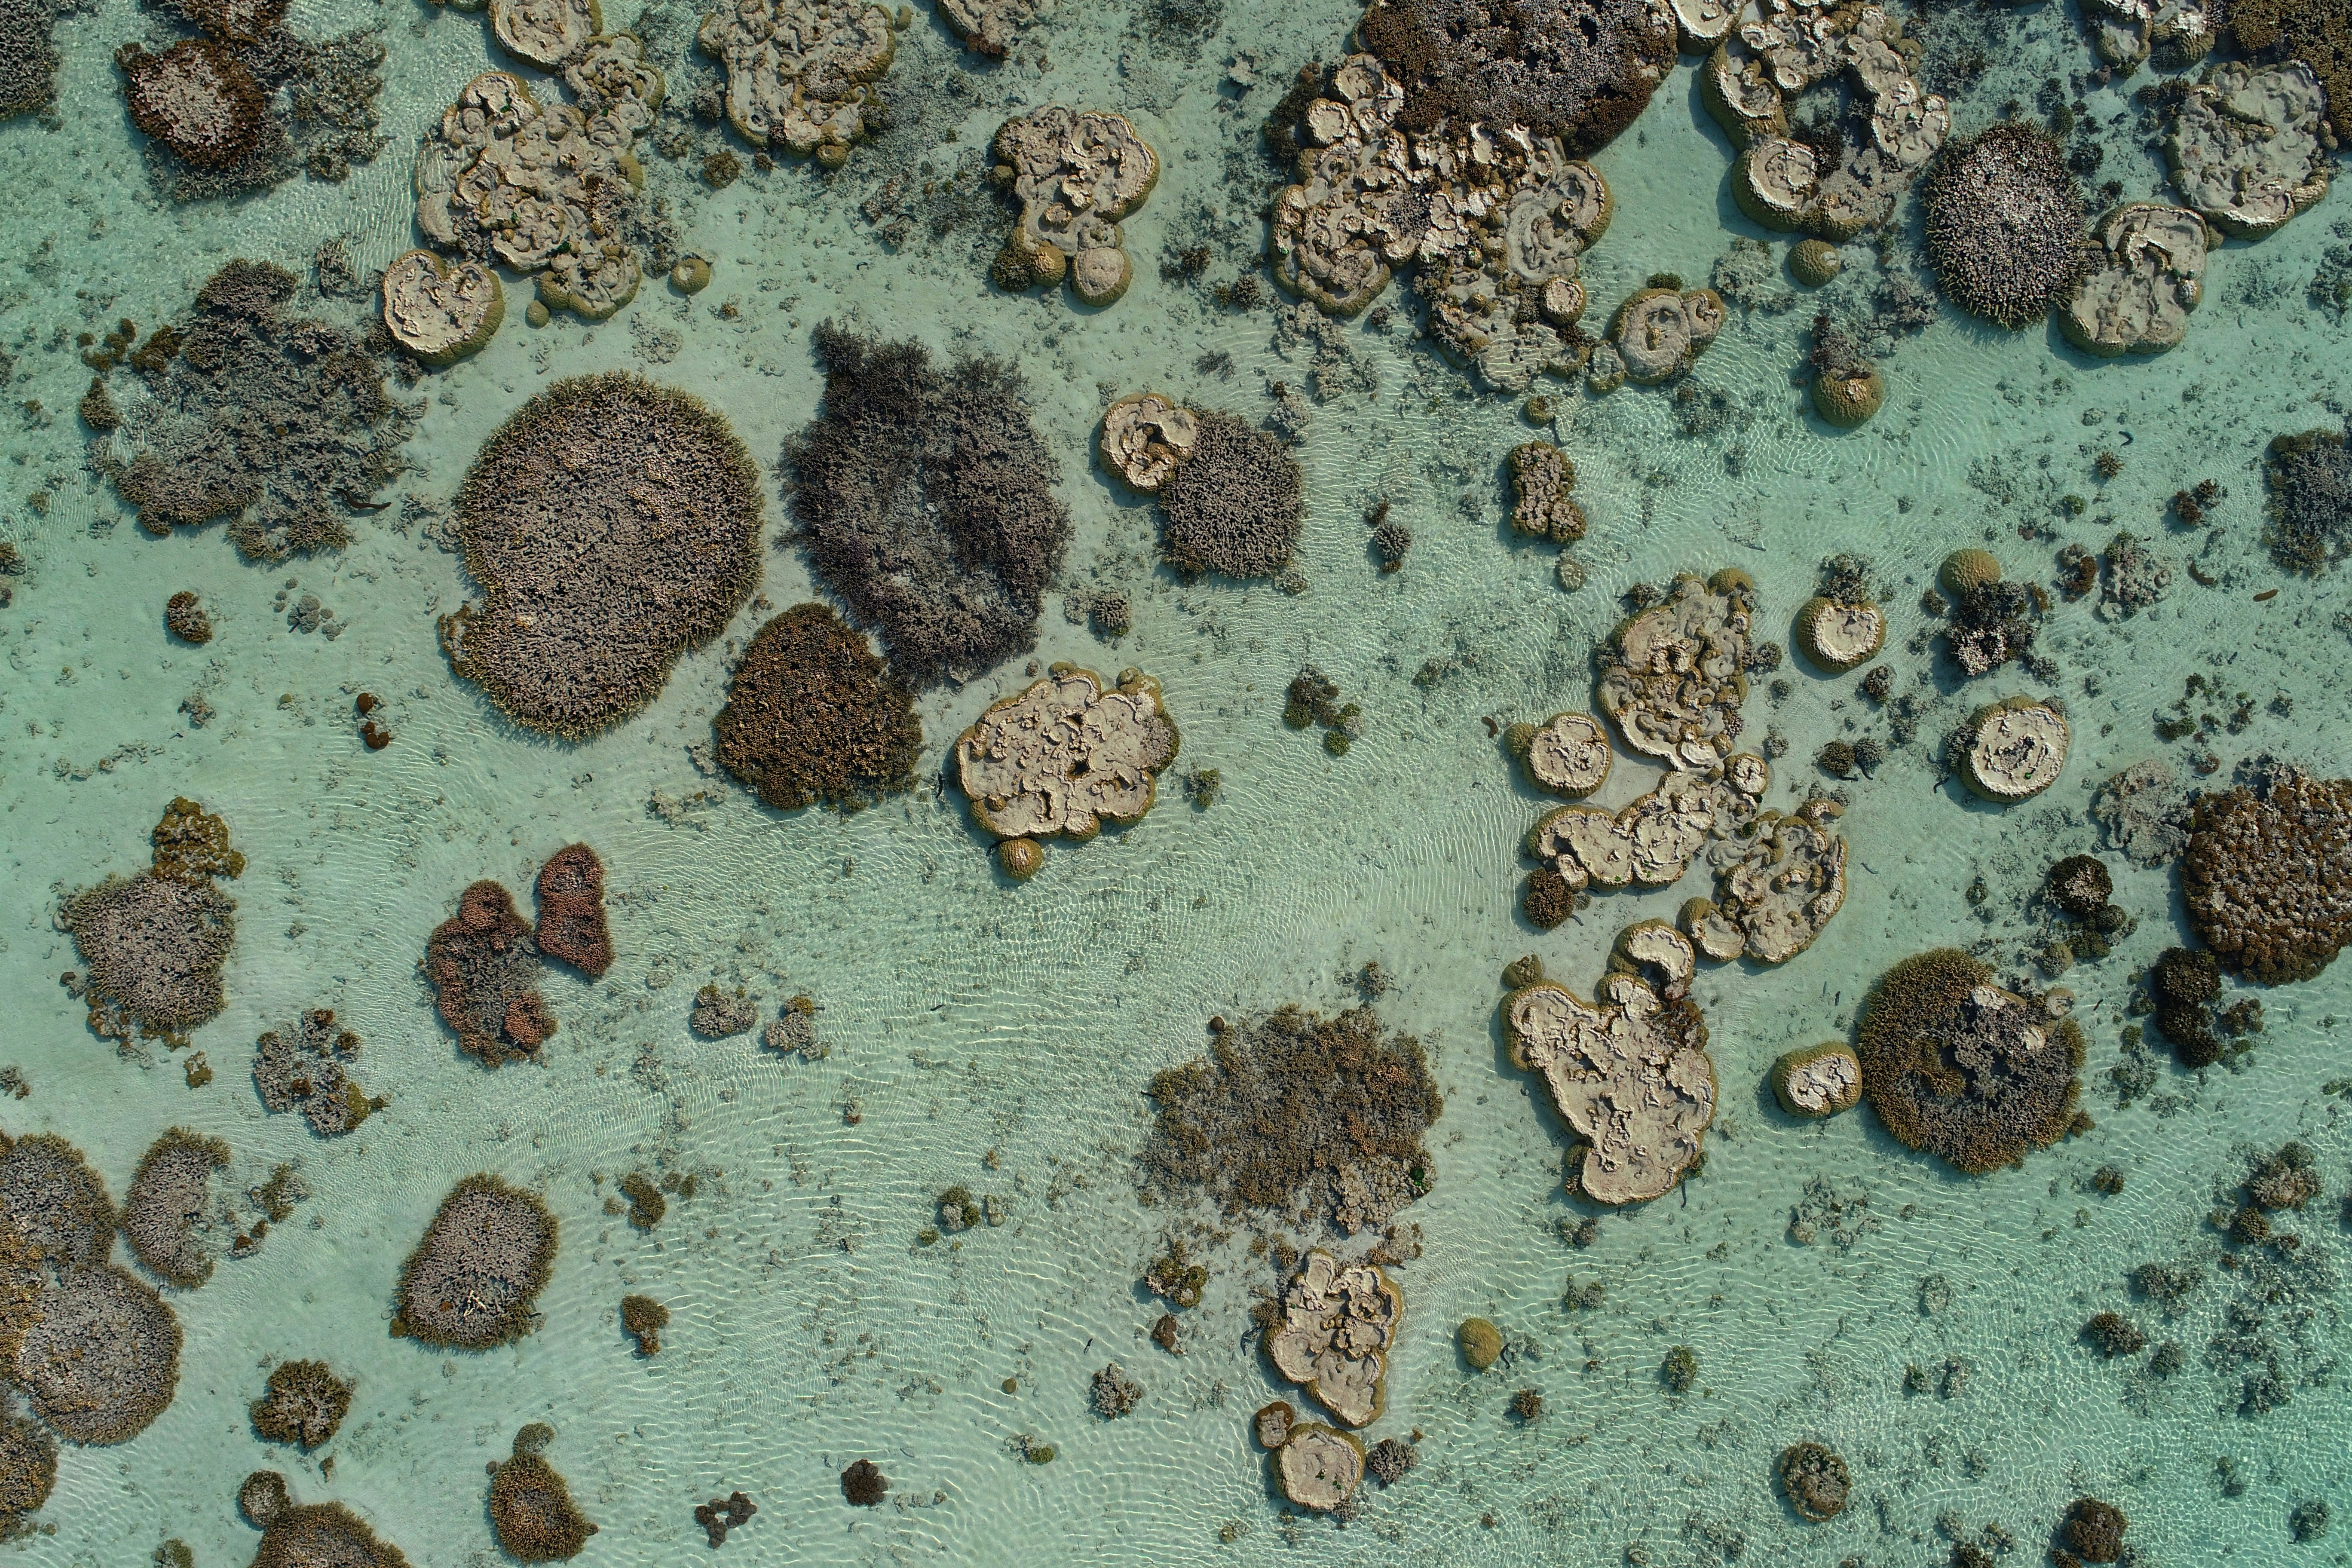 Live corals of Heron Reef, southern Great Barrier Reef